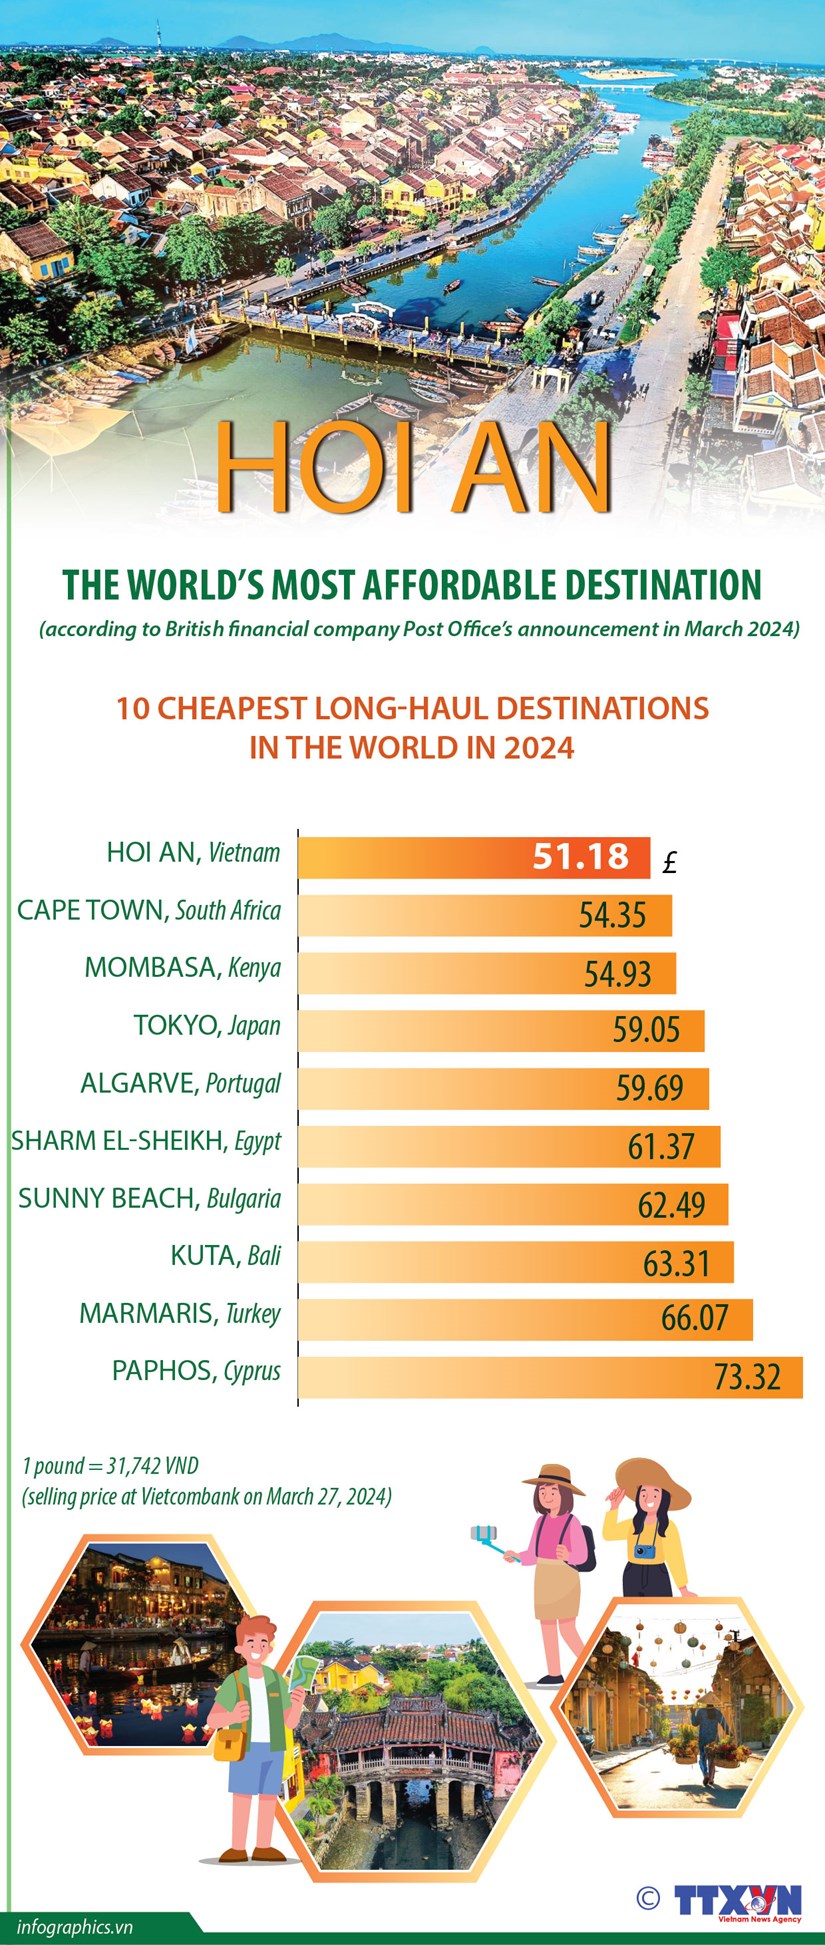 Hoi An emerges as most affordable long-haul destination hinh anh 1